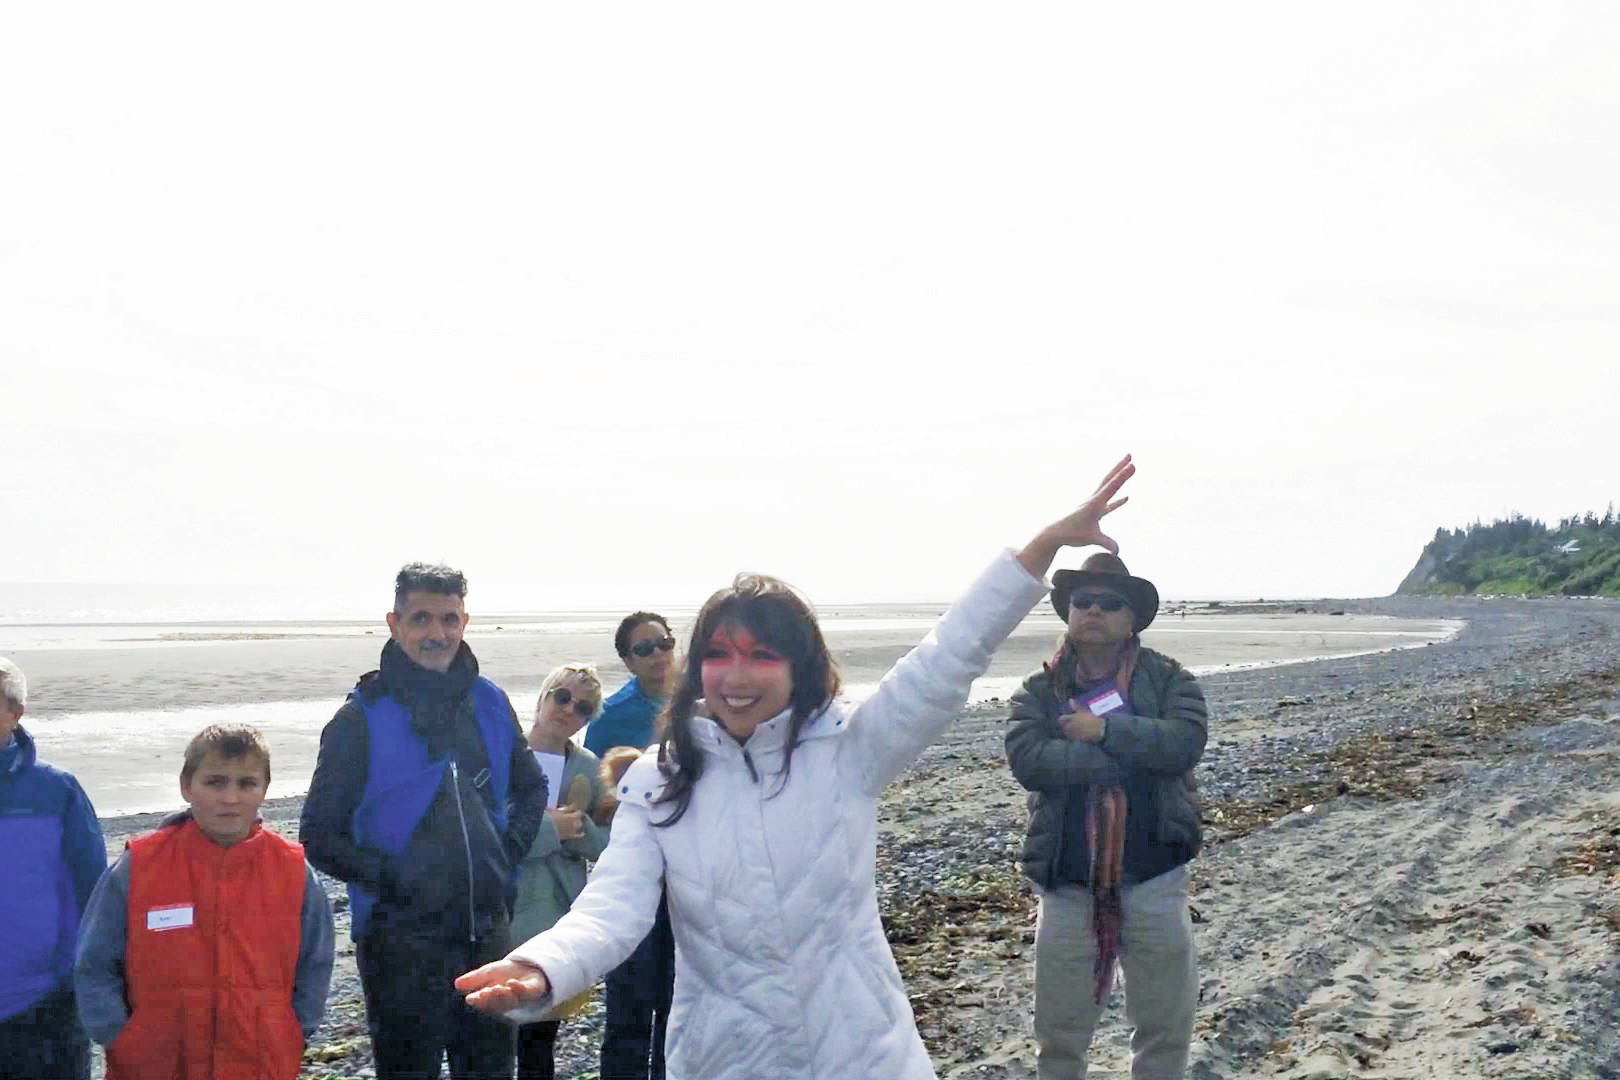 Emily Johnson conducts a land acknowledgment of Bishop’s Beach as Tuggeght, the Dena’ina word for “beluga,” at the art event, SHORE: Tuggeght, on Nov. 7, 2018, in Homer, Alaska. (Photo provided)